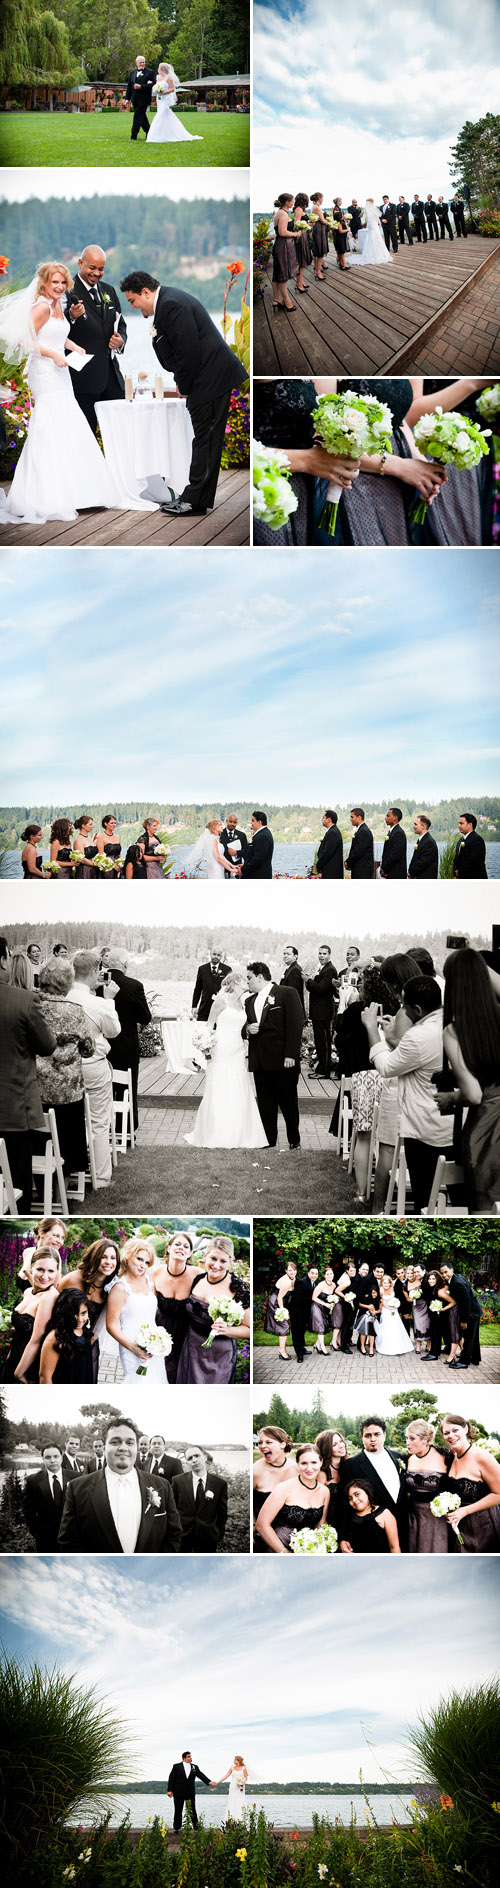 seattle waterfront real wedding ceremony at kiana lodge, black, white, blush and apple green wedding color palette, photo by laurel mcconnell phootgraphy